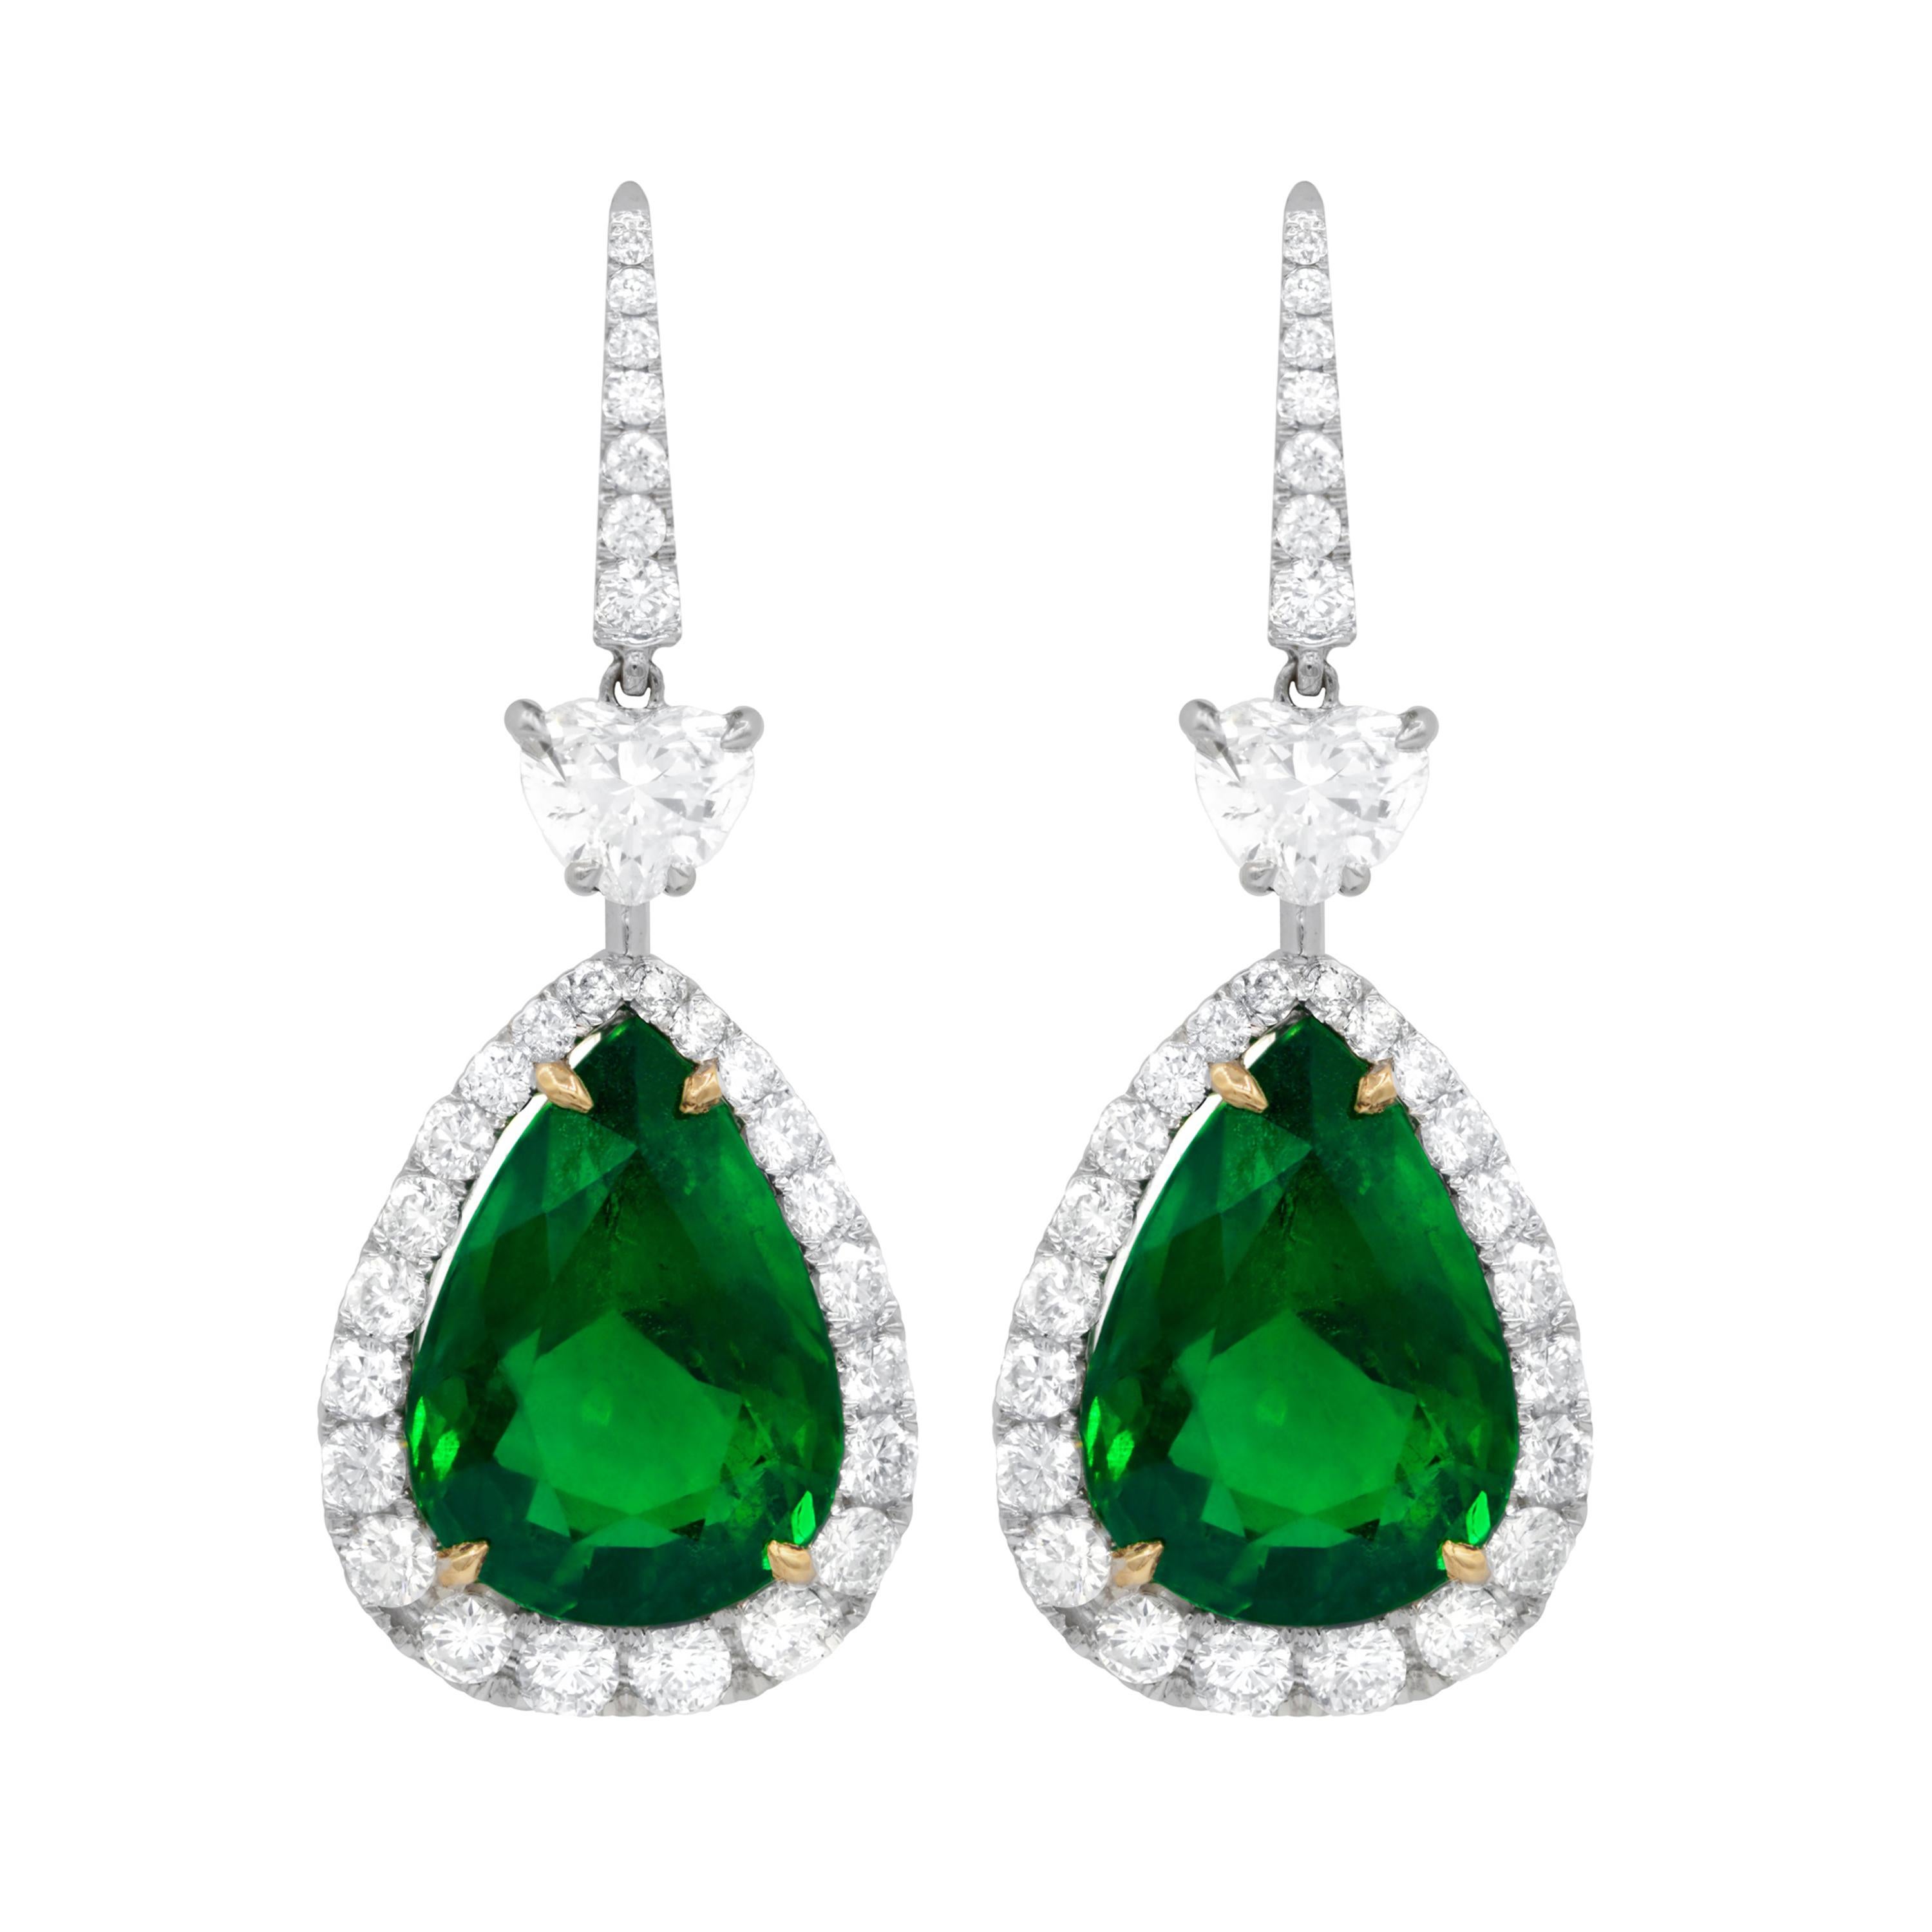 Diana M. 18kt White Gold Earrings with Pear Shape Emerald & White Diamonds